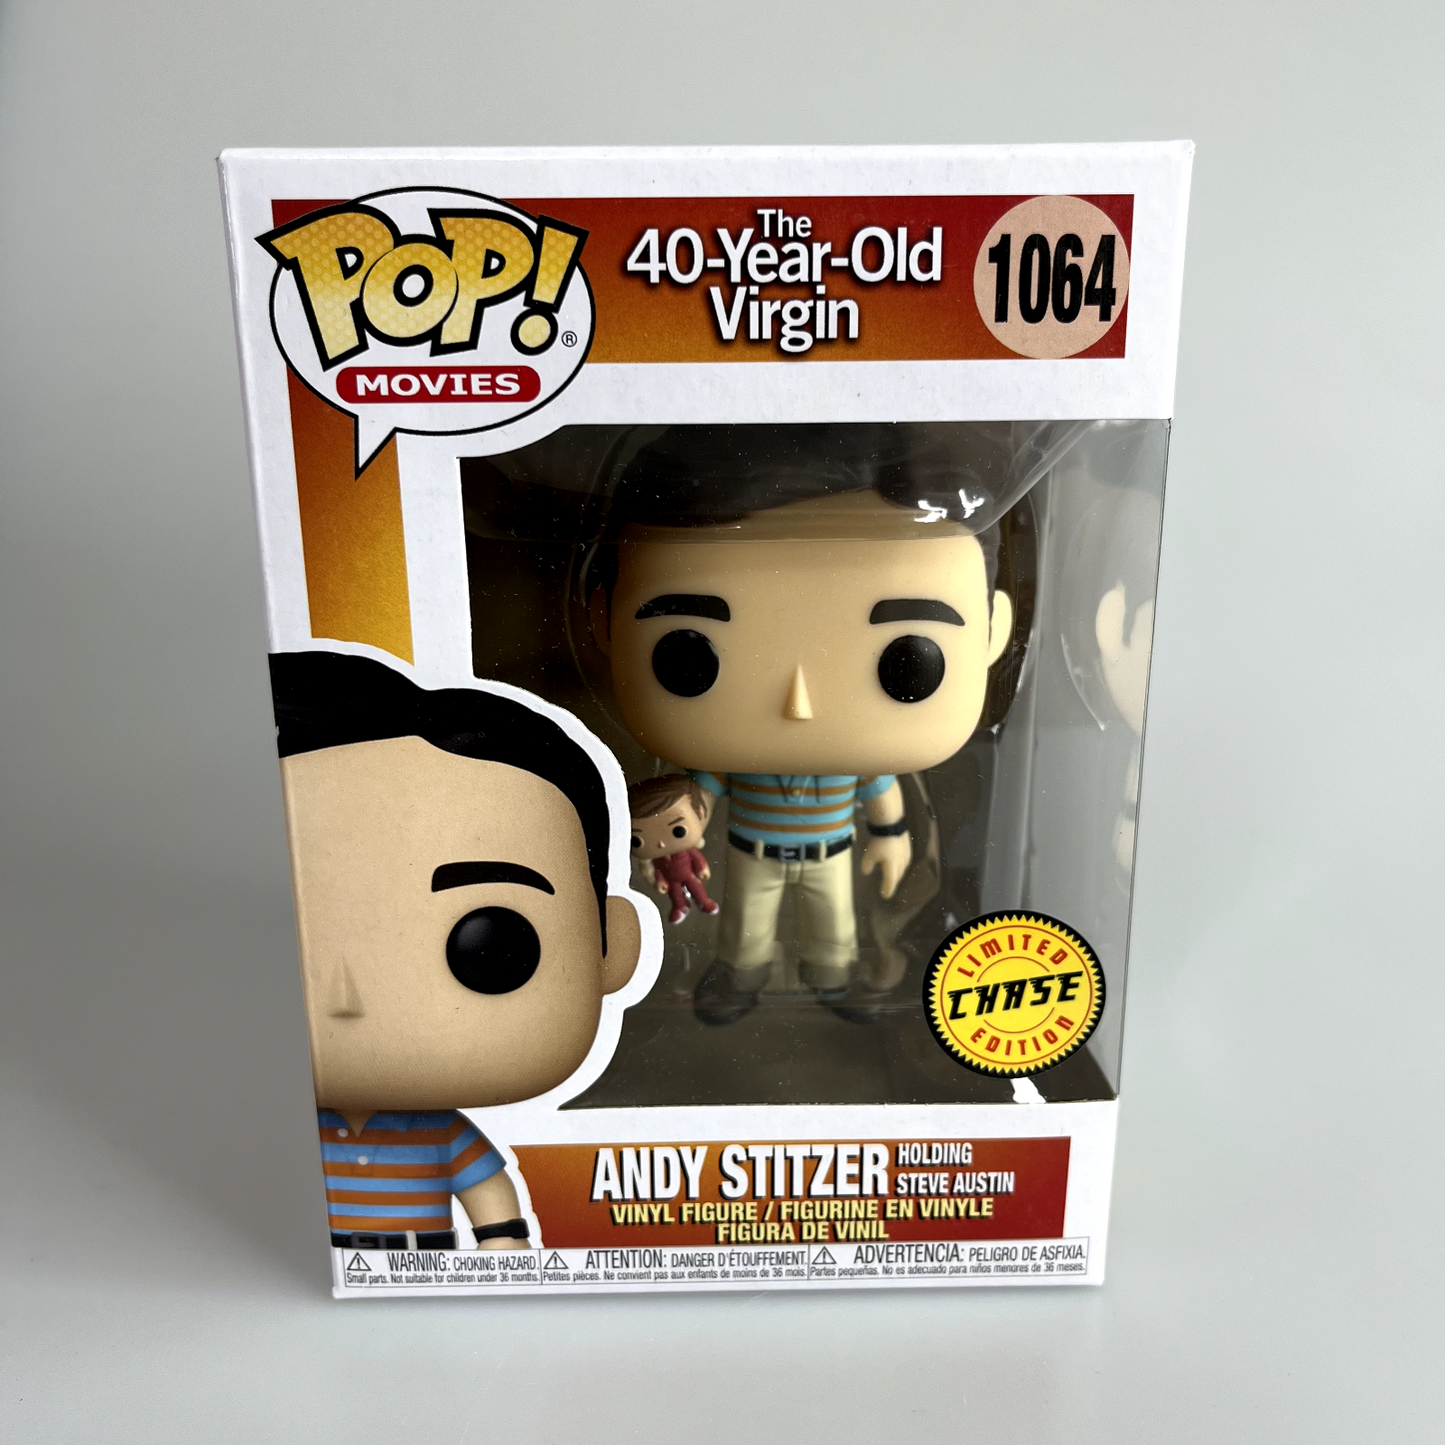 Funko - POP! Movies - The 40 Year Old Virgin - Andy Stitzer Holding Steve Austin - Limited Edition Chase - #1064